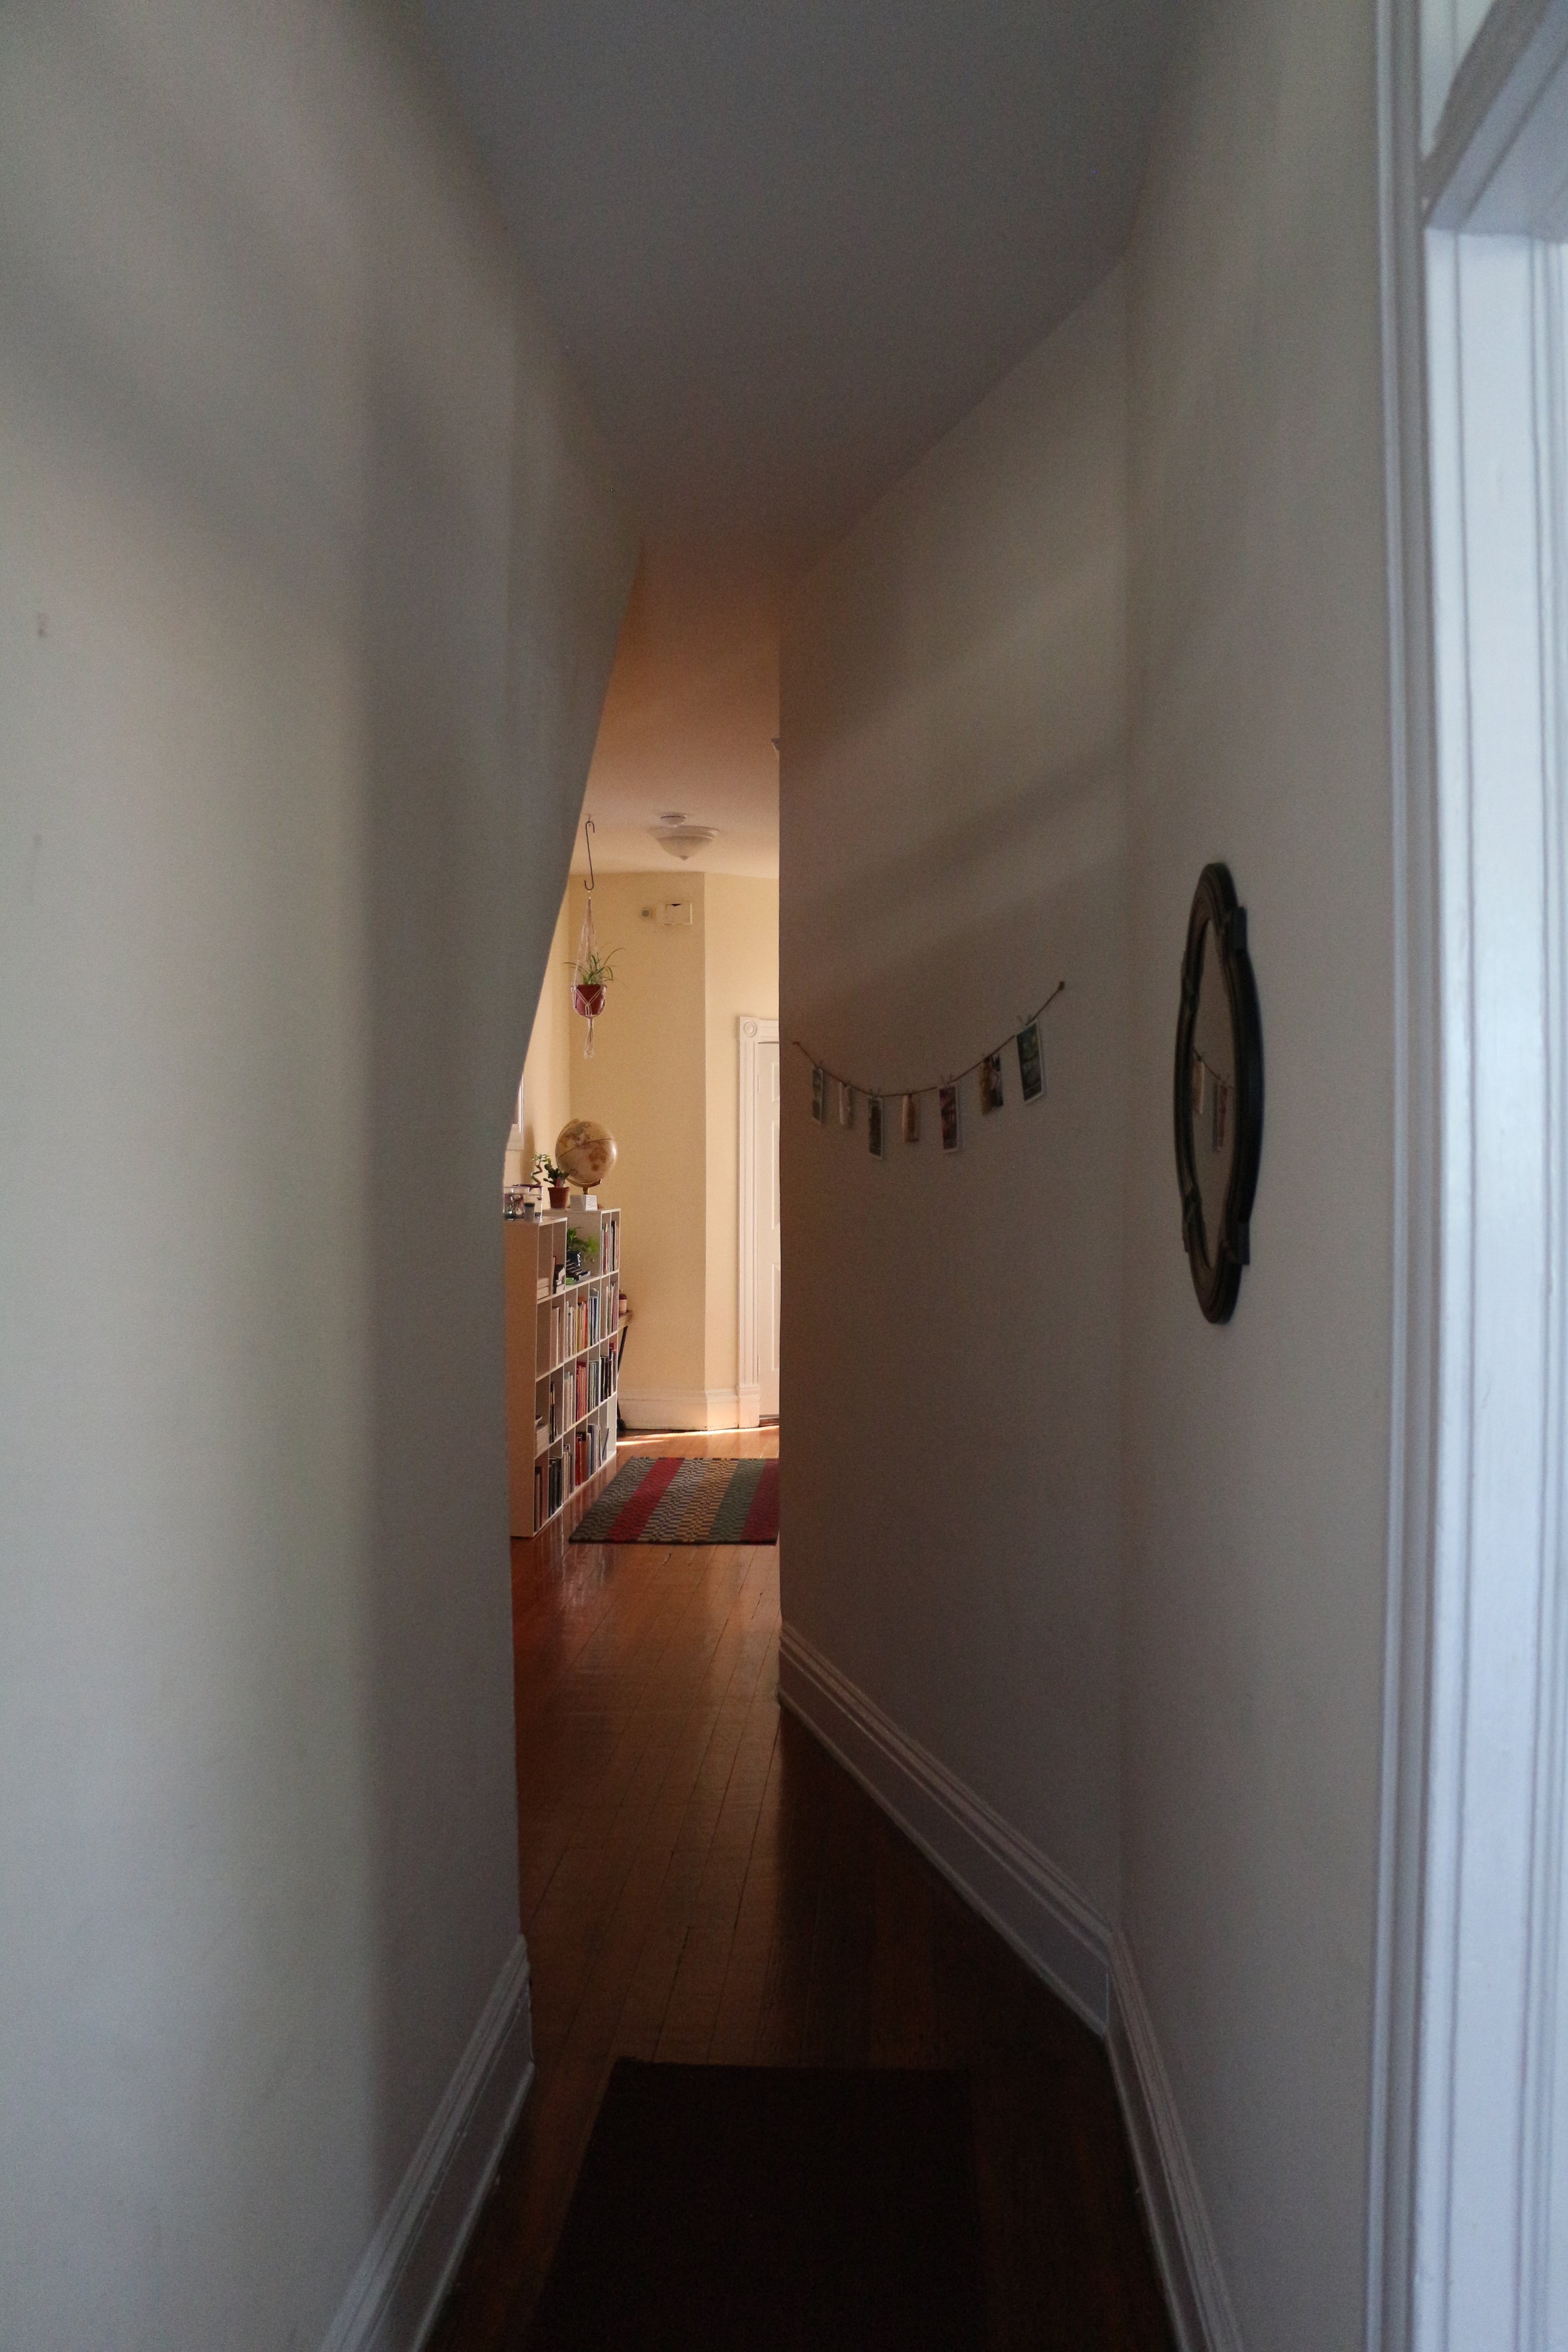 The view down the hallway from the front door. (living room is just to the right)